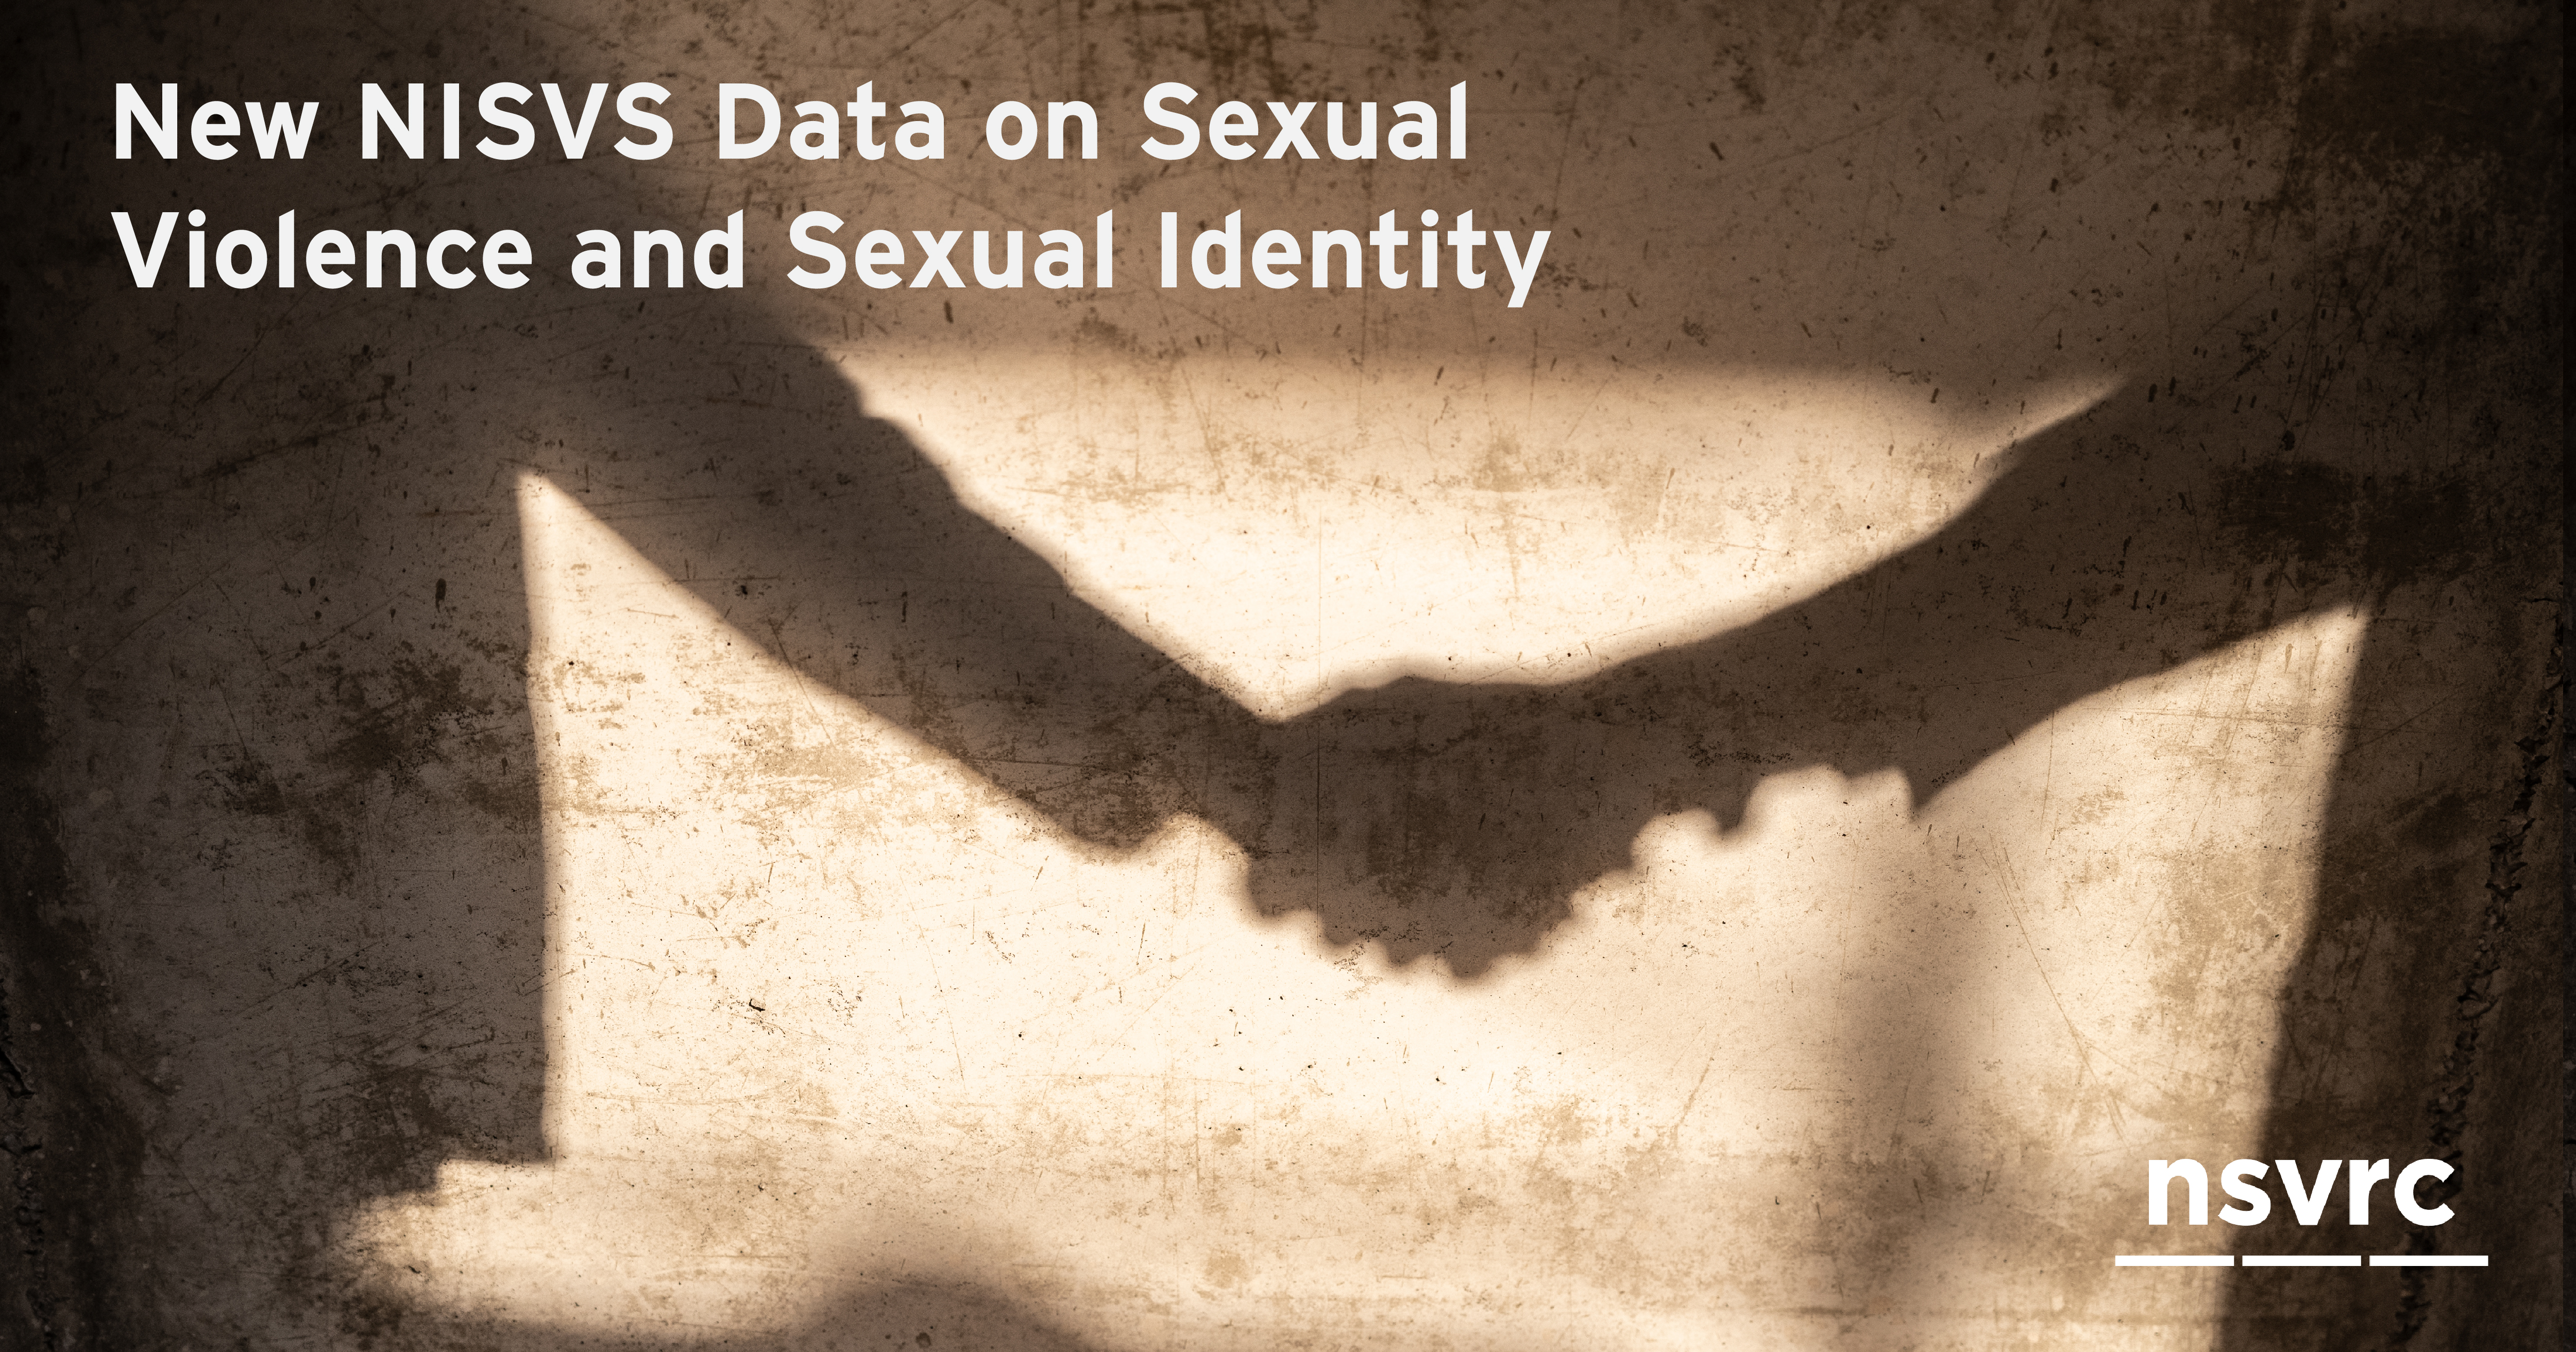 New NISVS Data on Sexual Violence and Sexual Identity: Key Findings and Prevention Recommendations